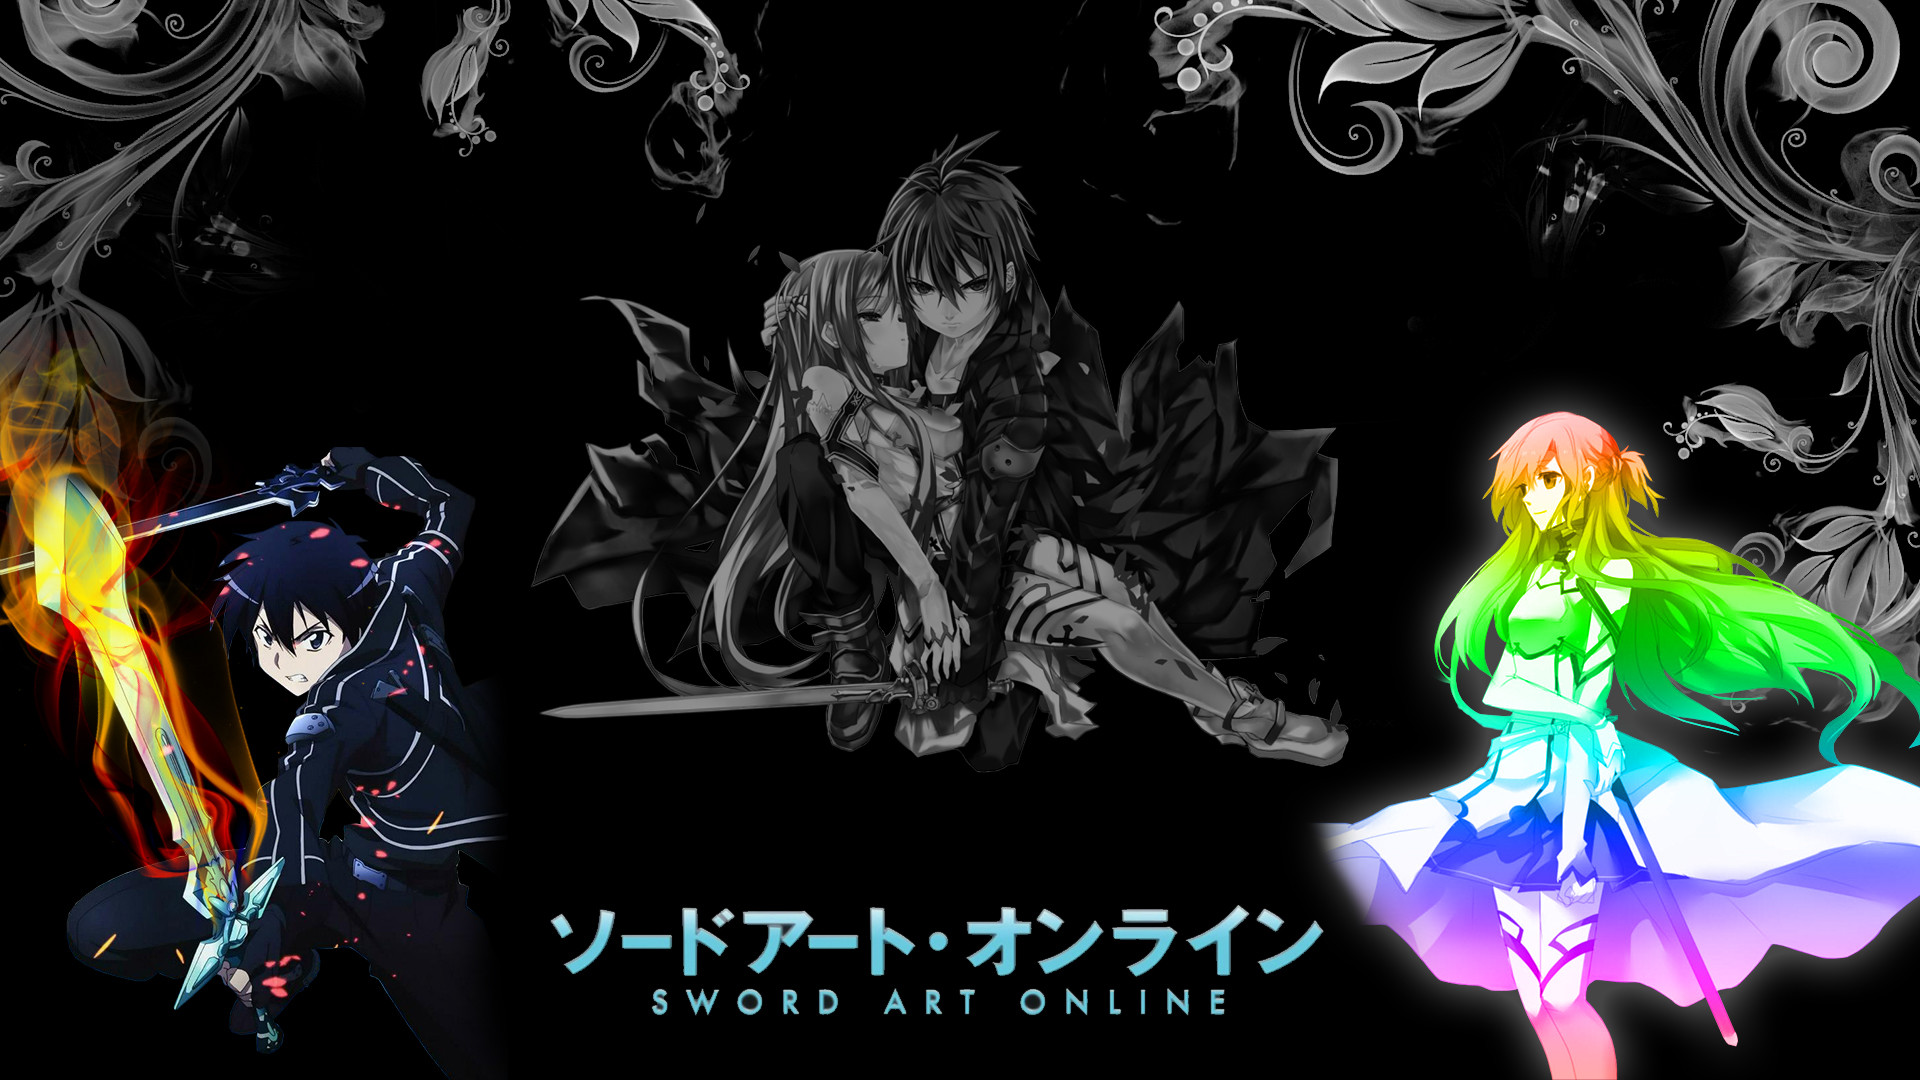 … Sword Art Online Wallpaper by Raynbow-RaY